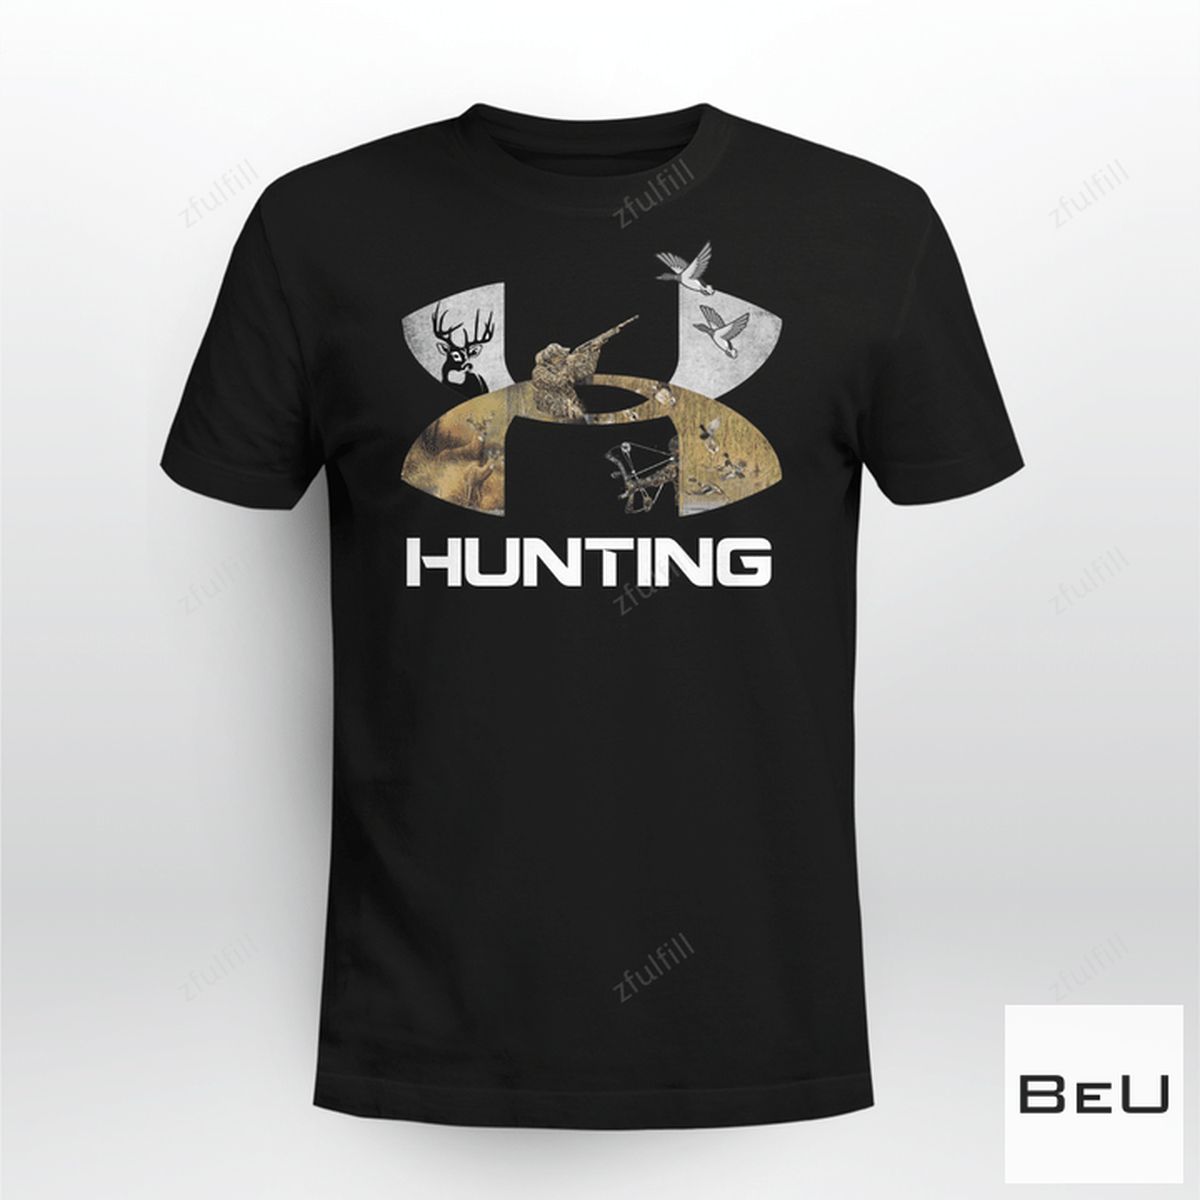 Under Armour Hunting shirt